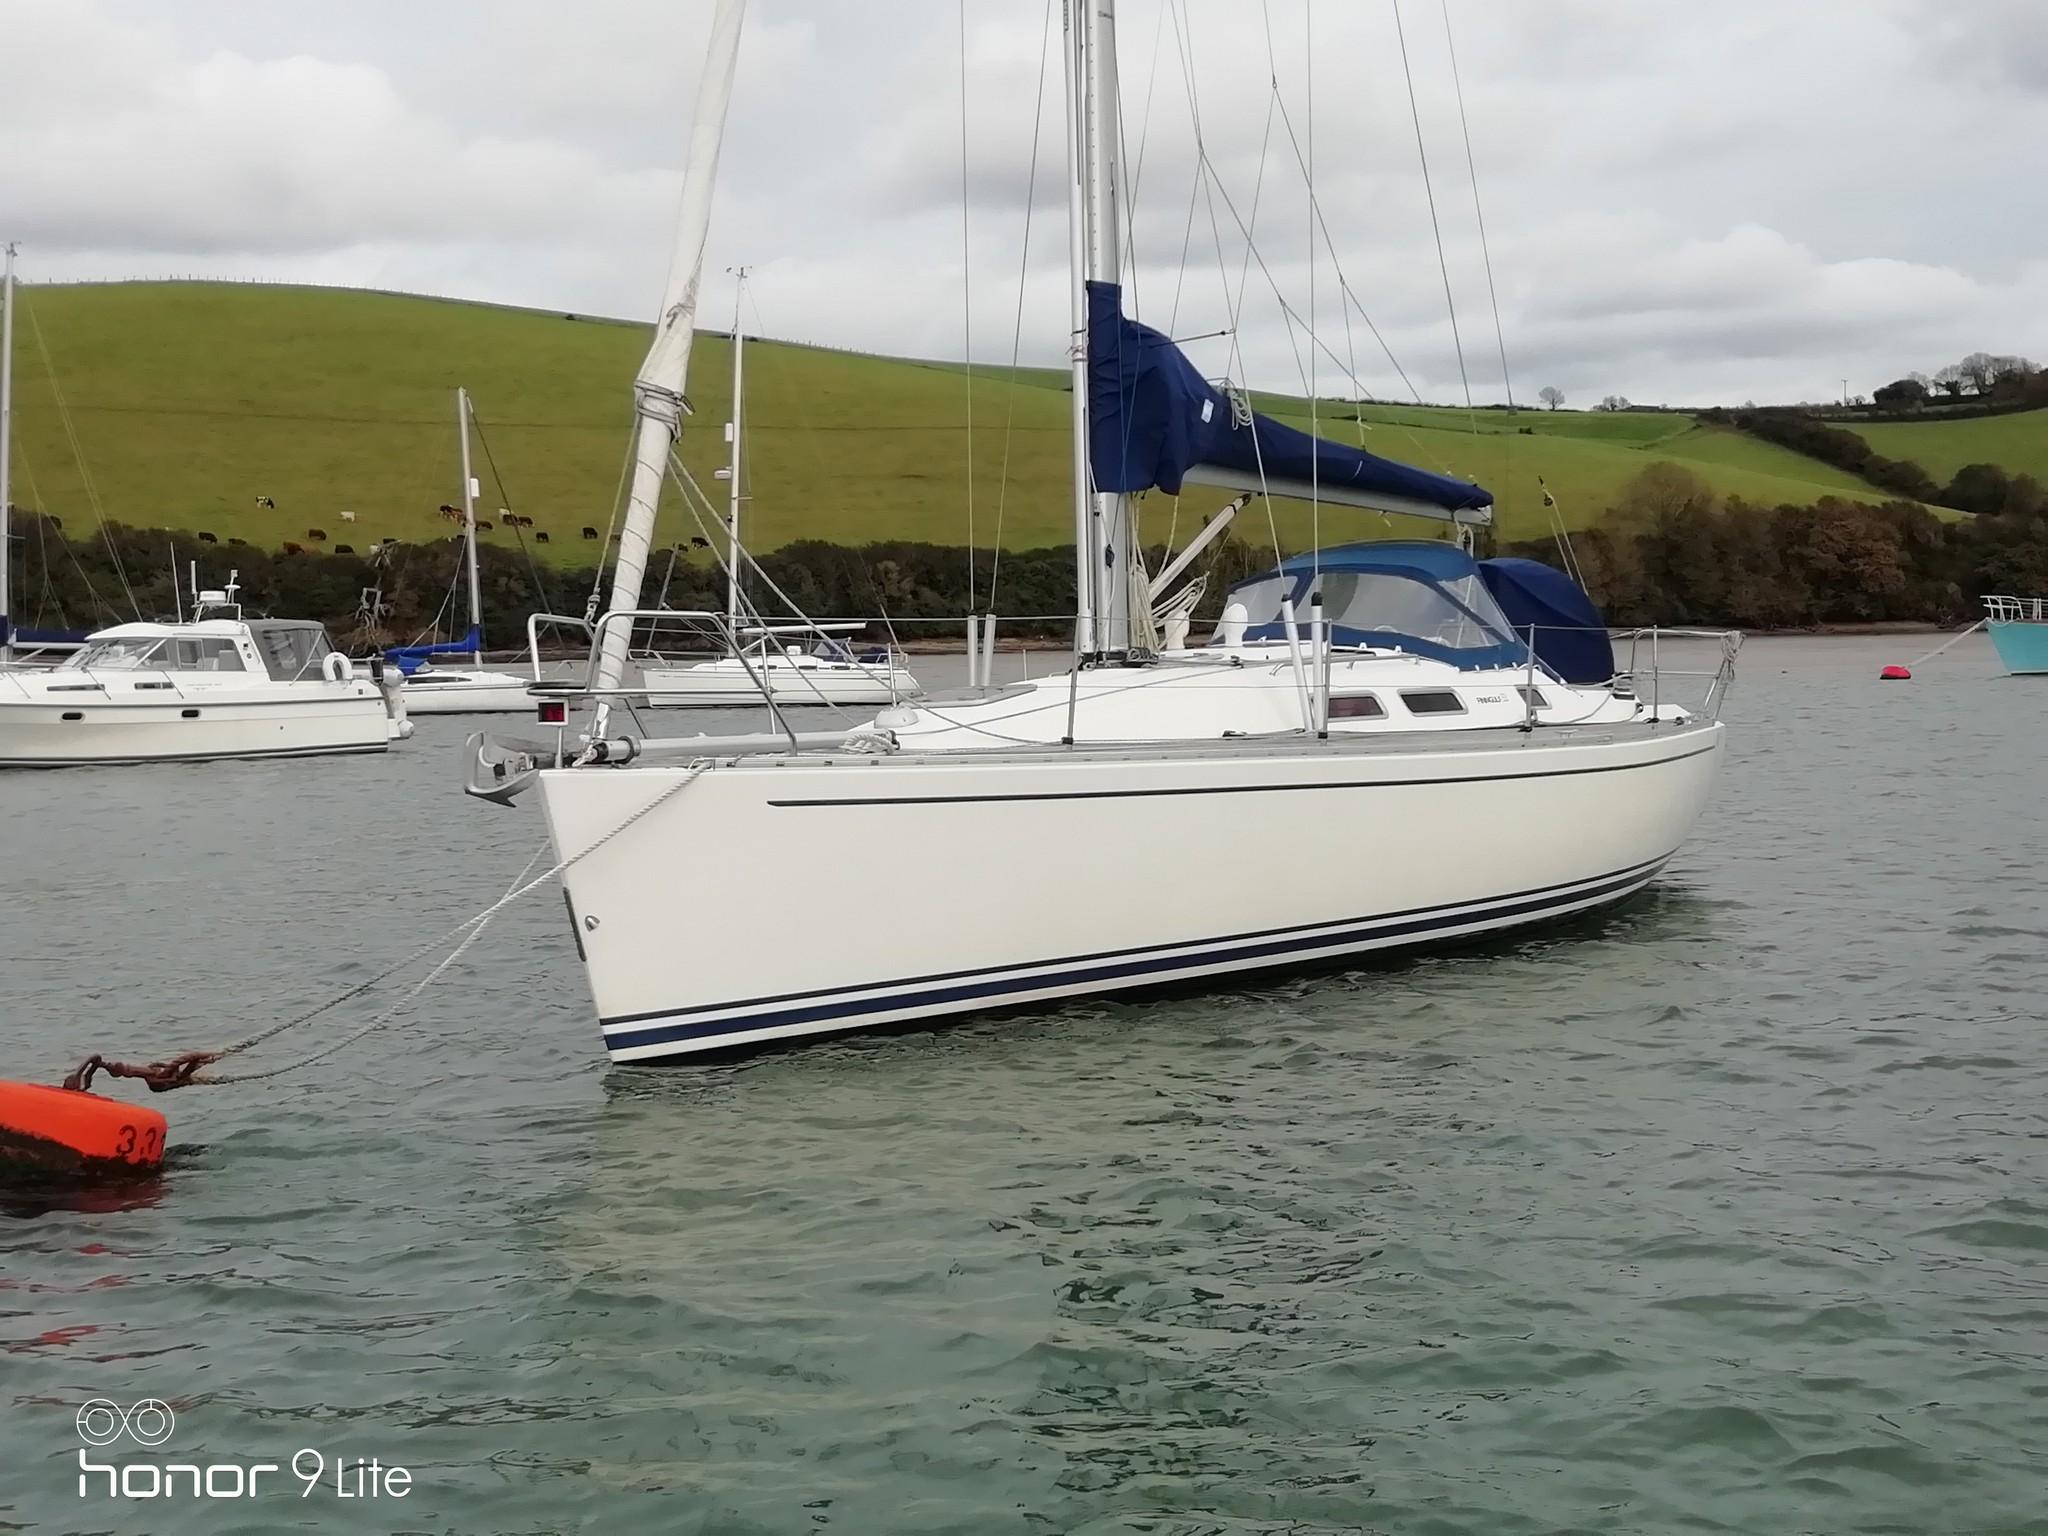 finngulf yachts for sale uk